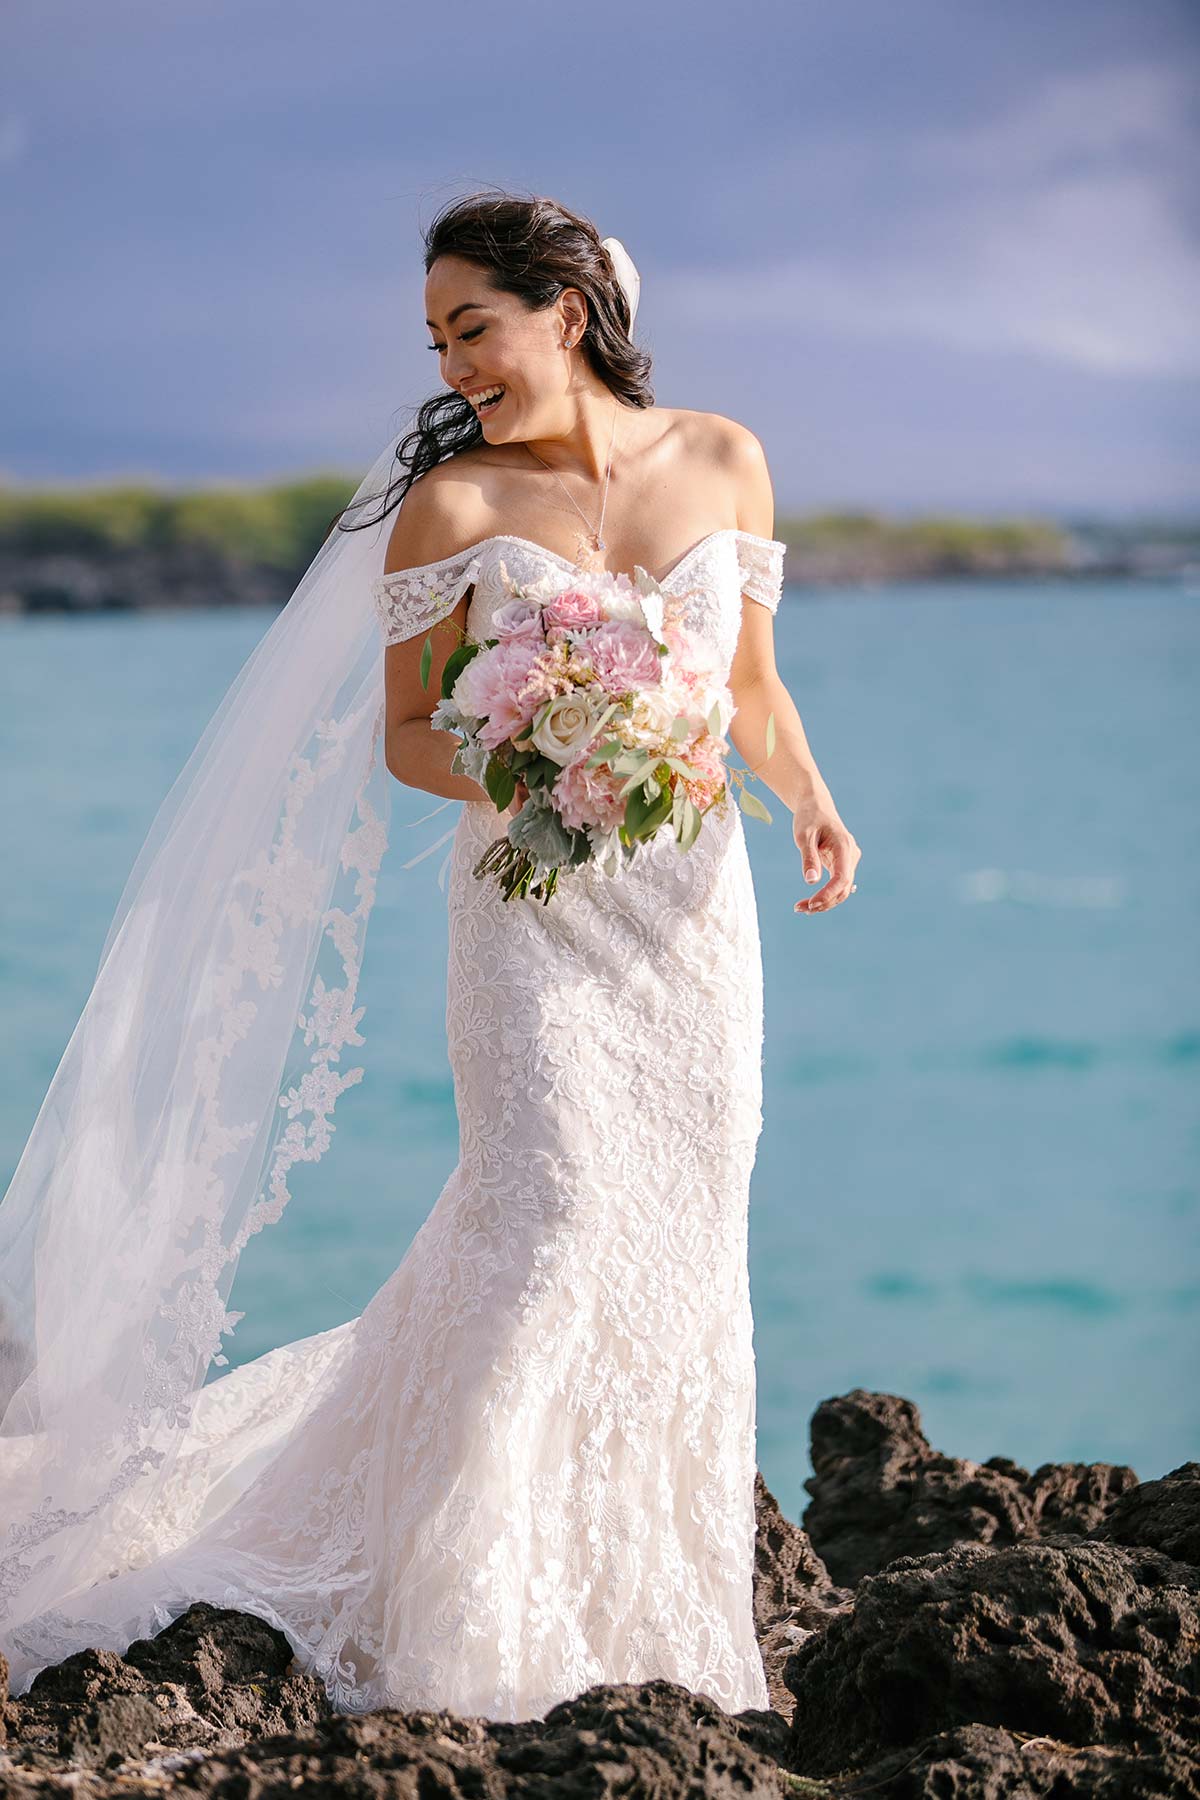 image of bride on the beach